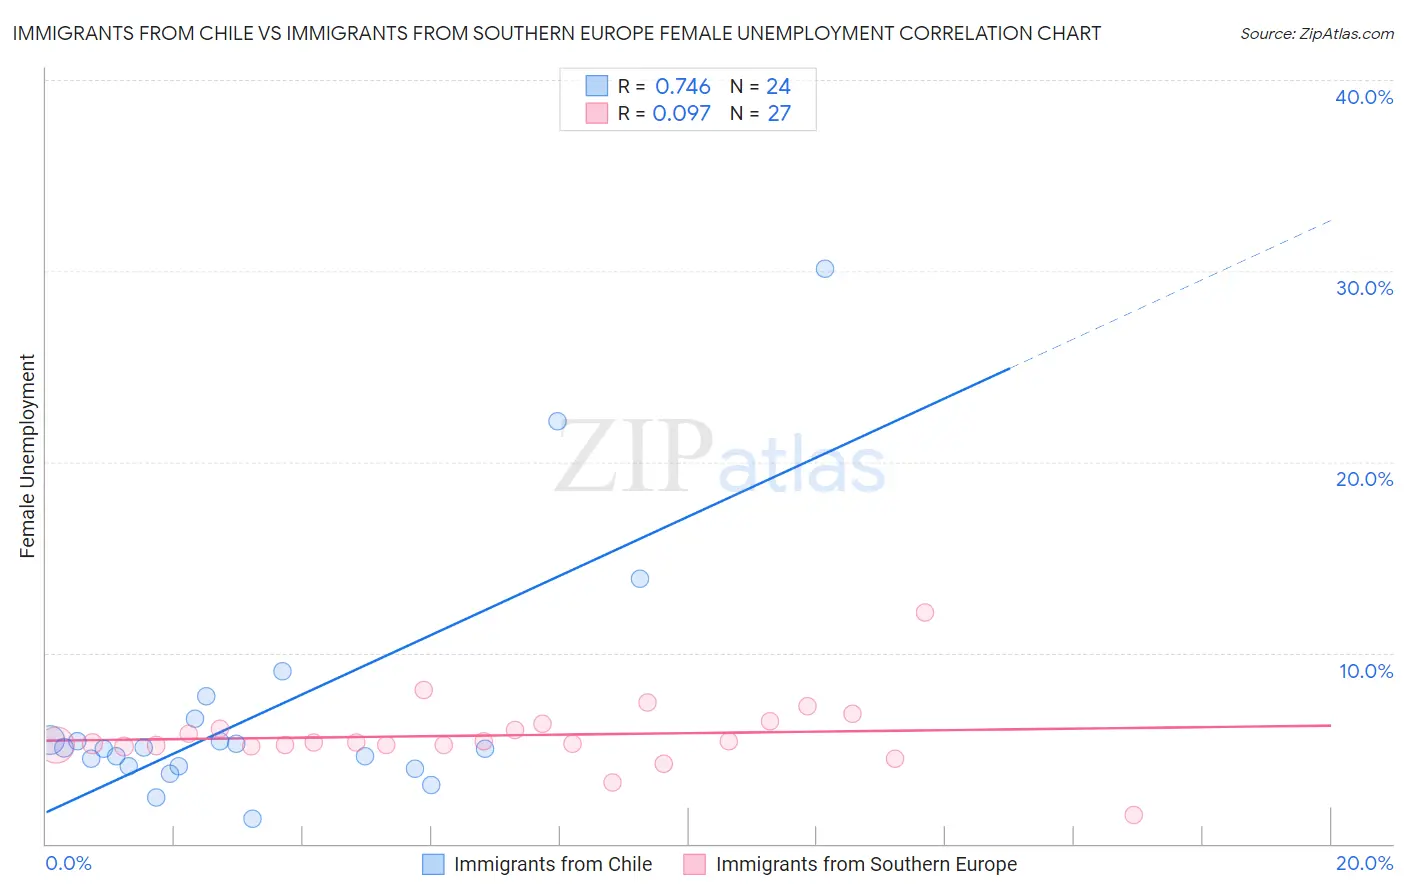 Immigrants from Chile vs Immigrants from Southern Europe Female Unemployment